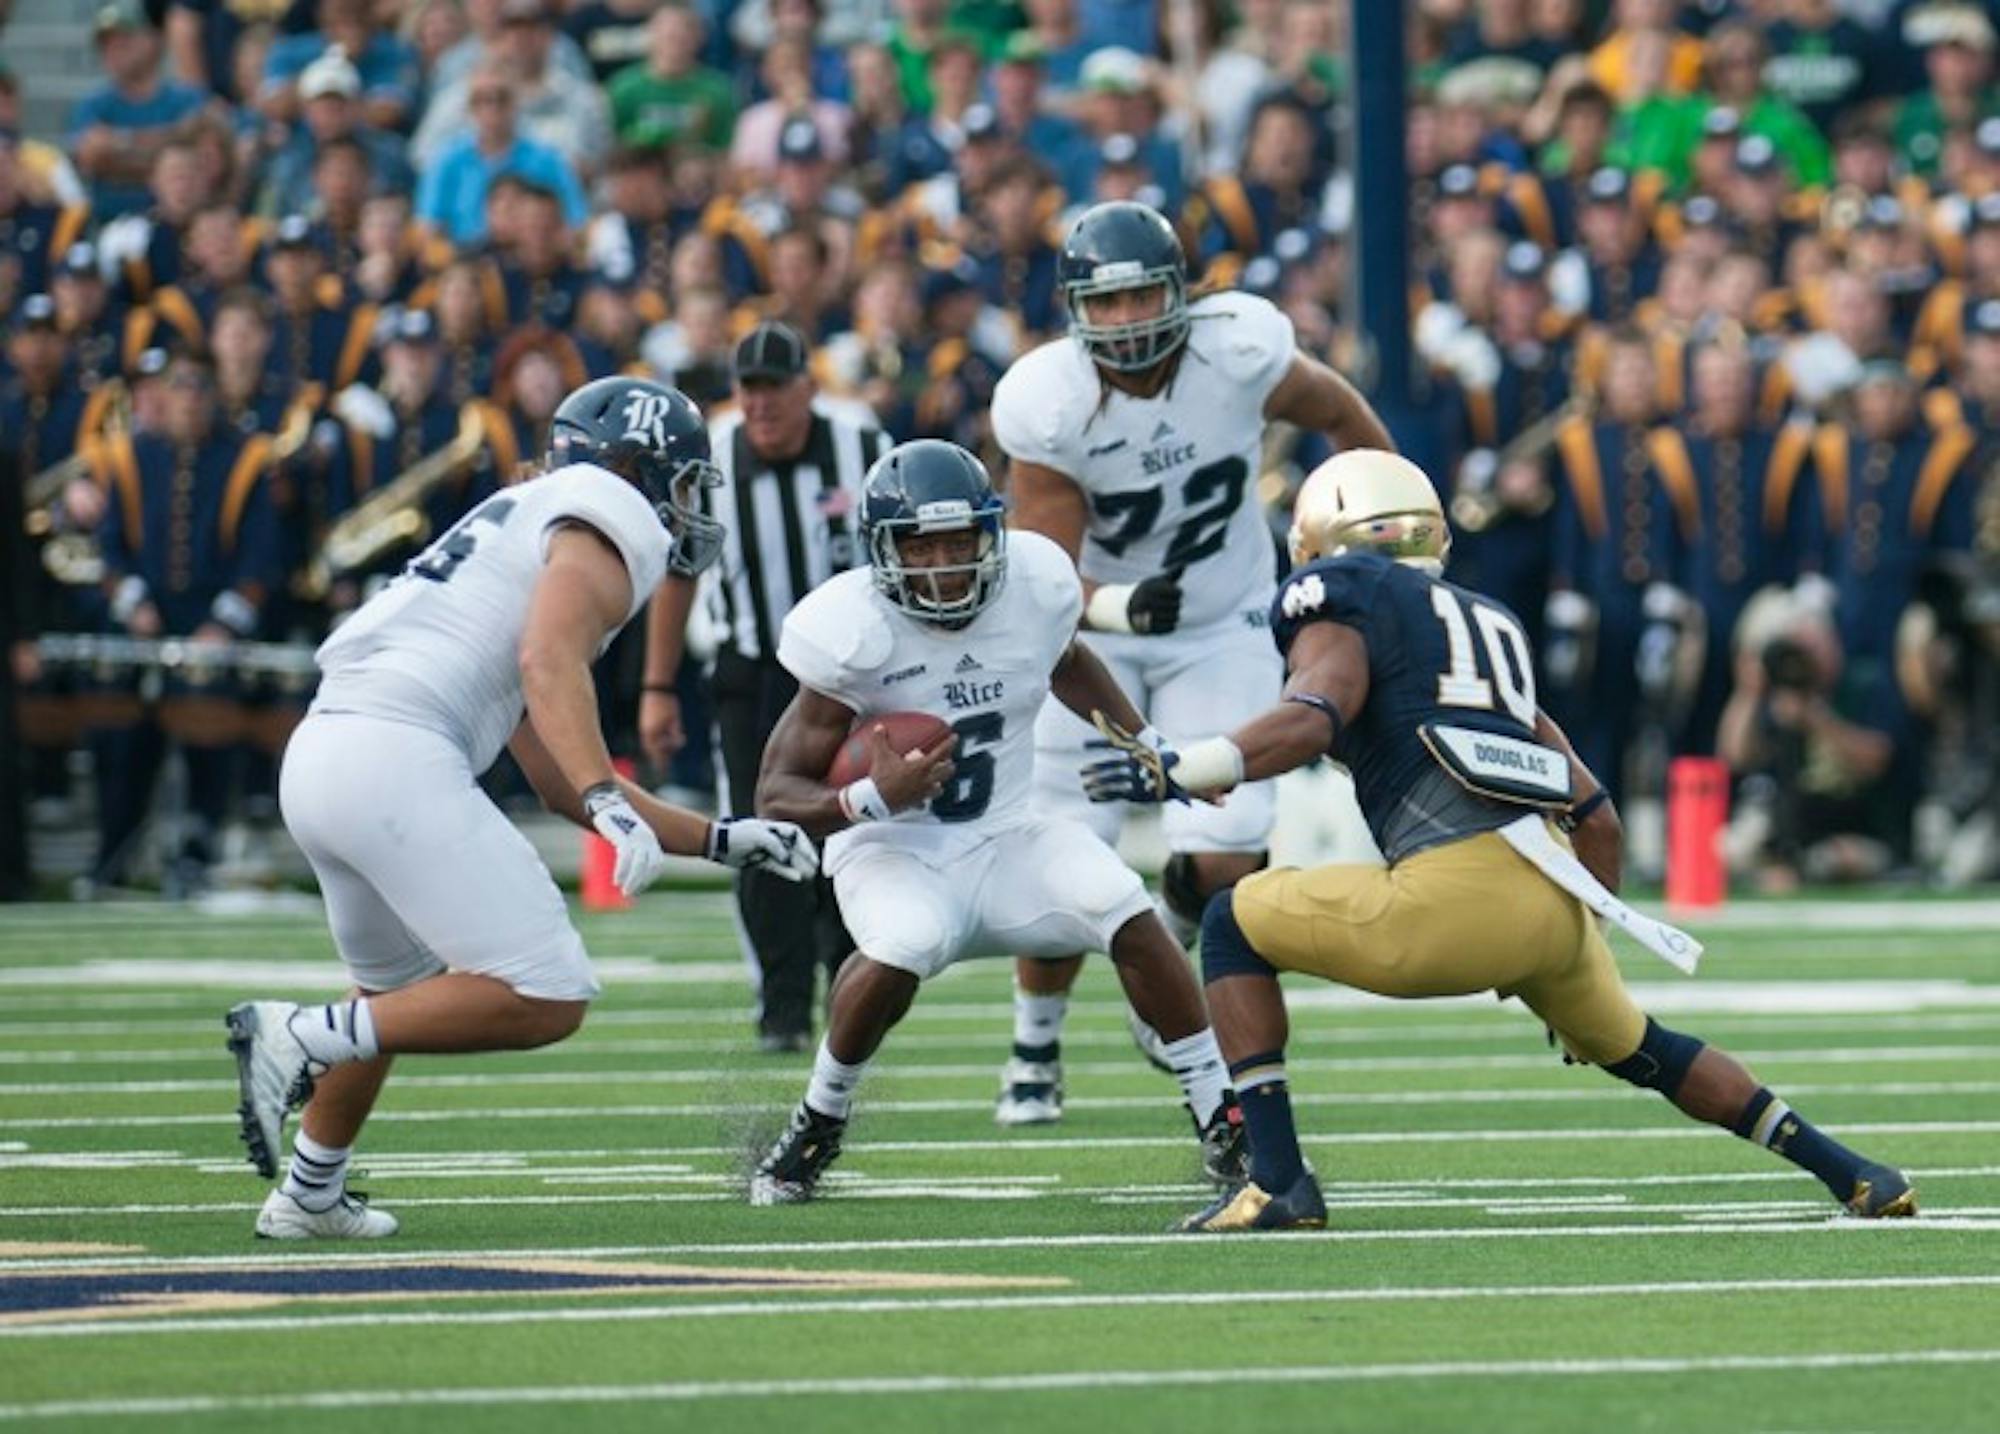 rish sophomore safety Max Redfield prepares to tackle the ballcarrier in Notre Dame’s 48-17 victory against Rice on Saturday. Refield made his second career start in the game.